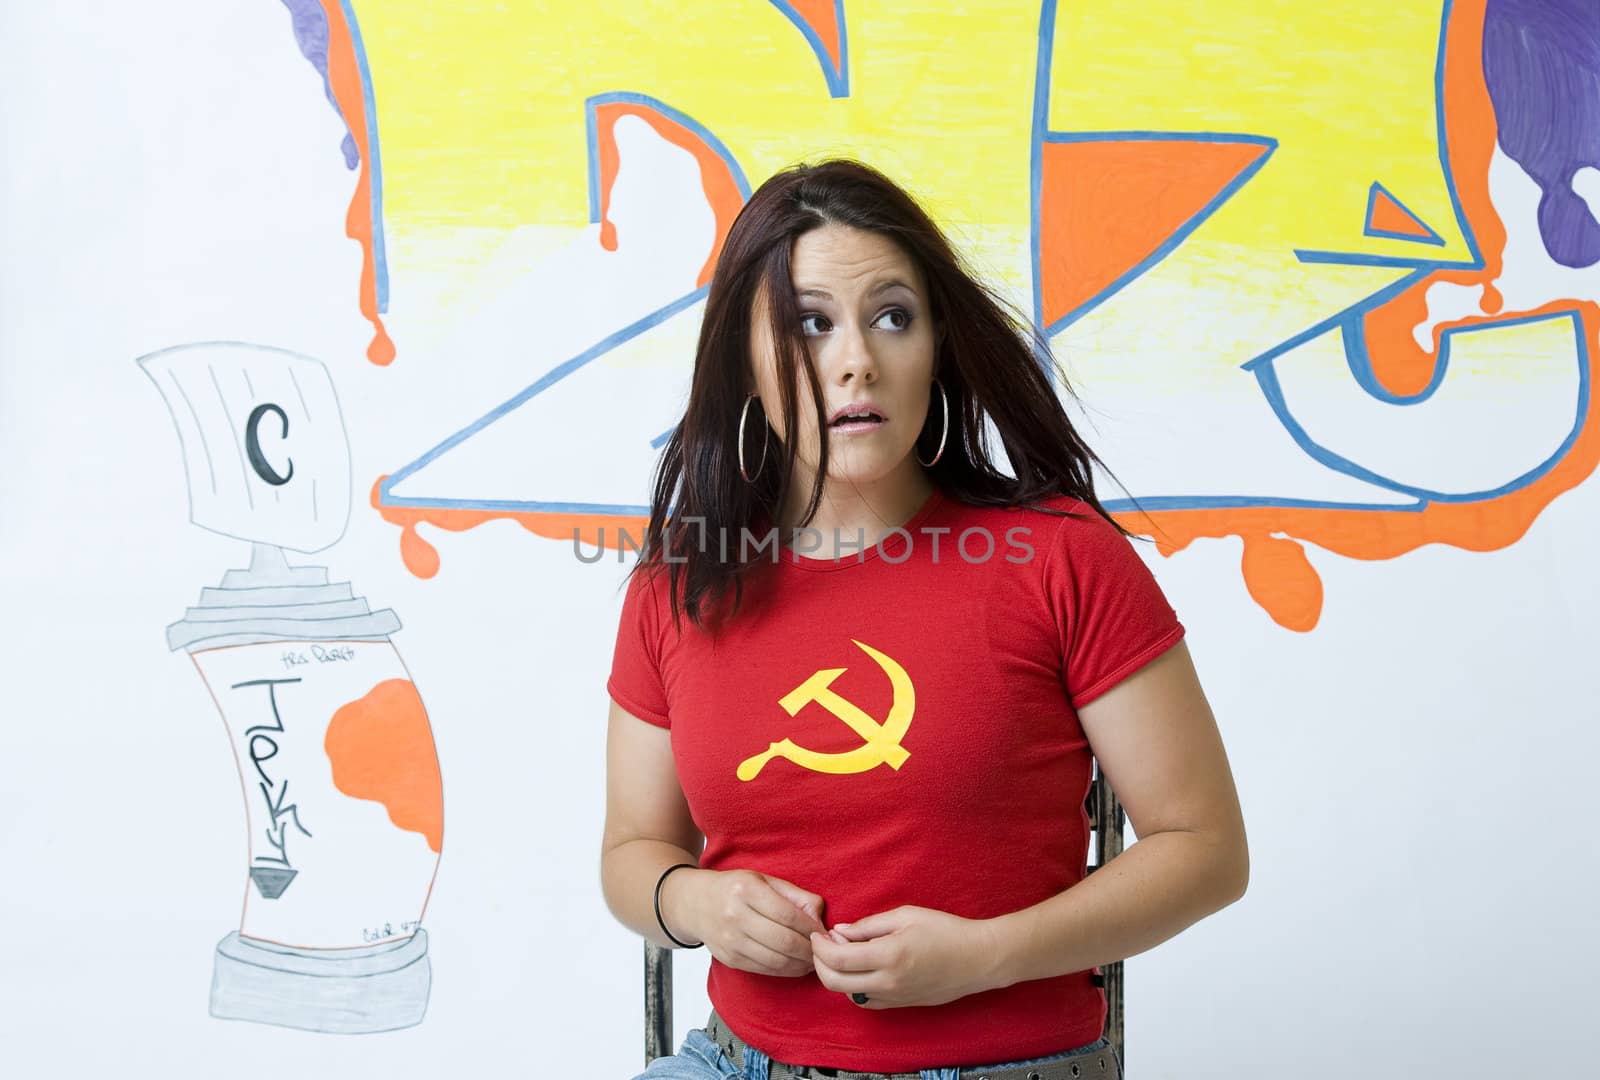 Young women with frighten expression sitting on a ruff up chair in front of a graffiti background